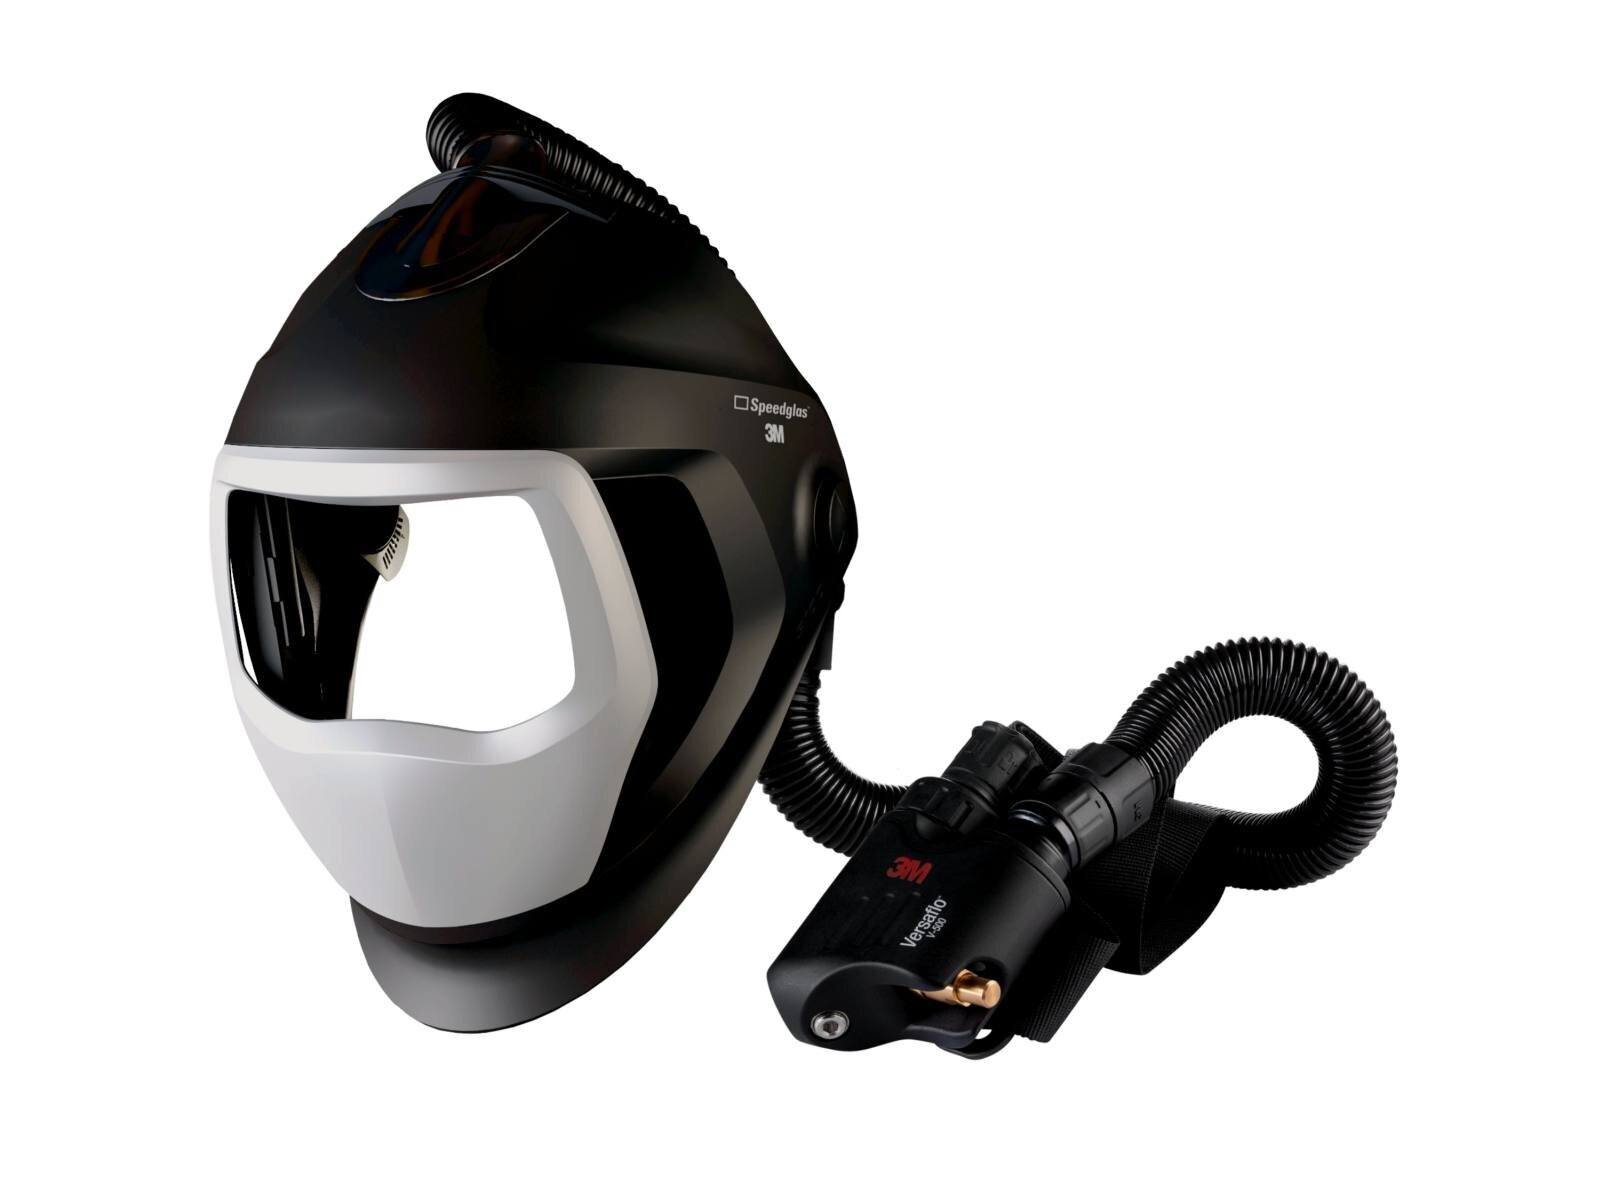 3M Speedglas welding mask 9100 Air without ADF, with Versaflo V-500E compressed air breathing protection, air hose QRS, adapter 5333506, air flow meter incl. storage bag #568500